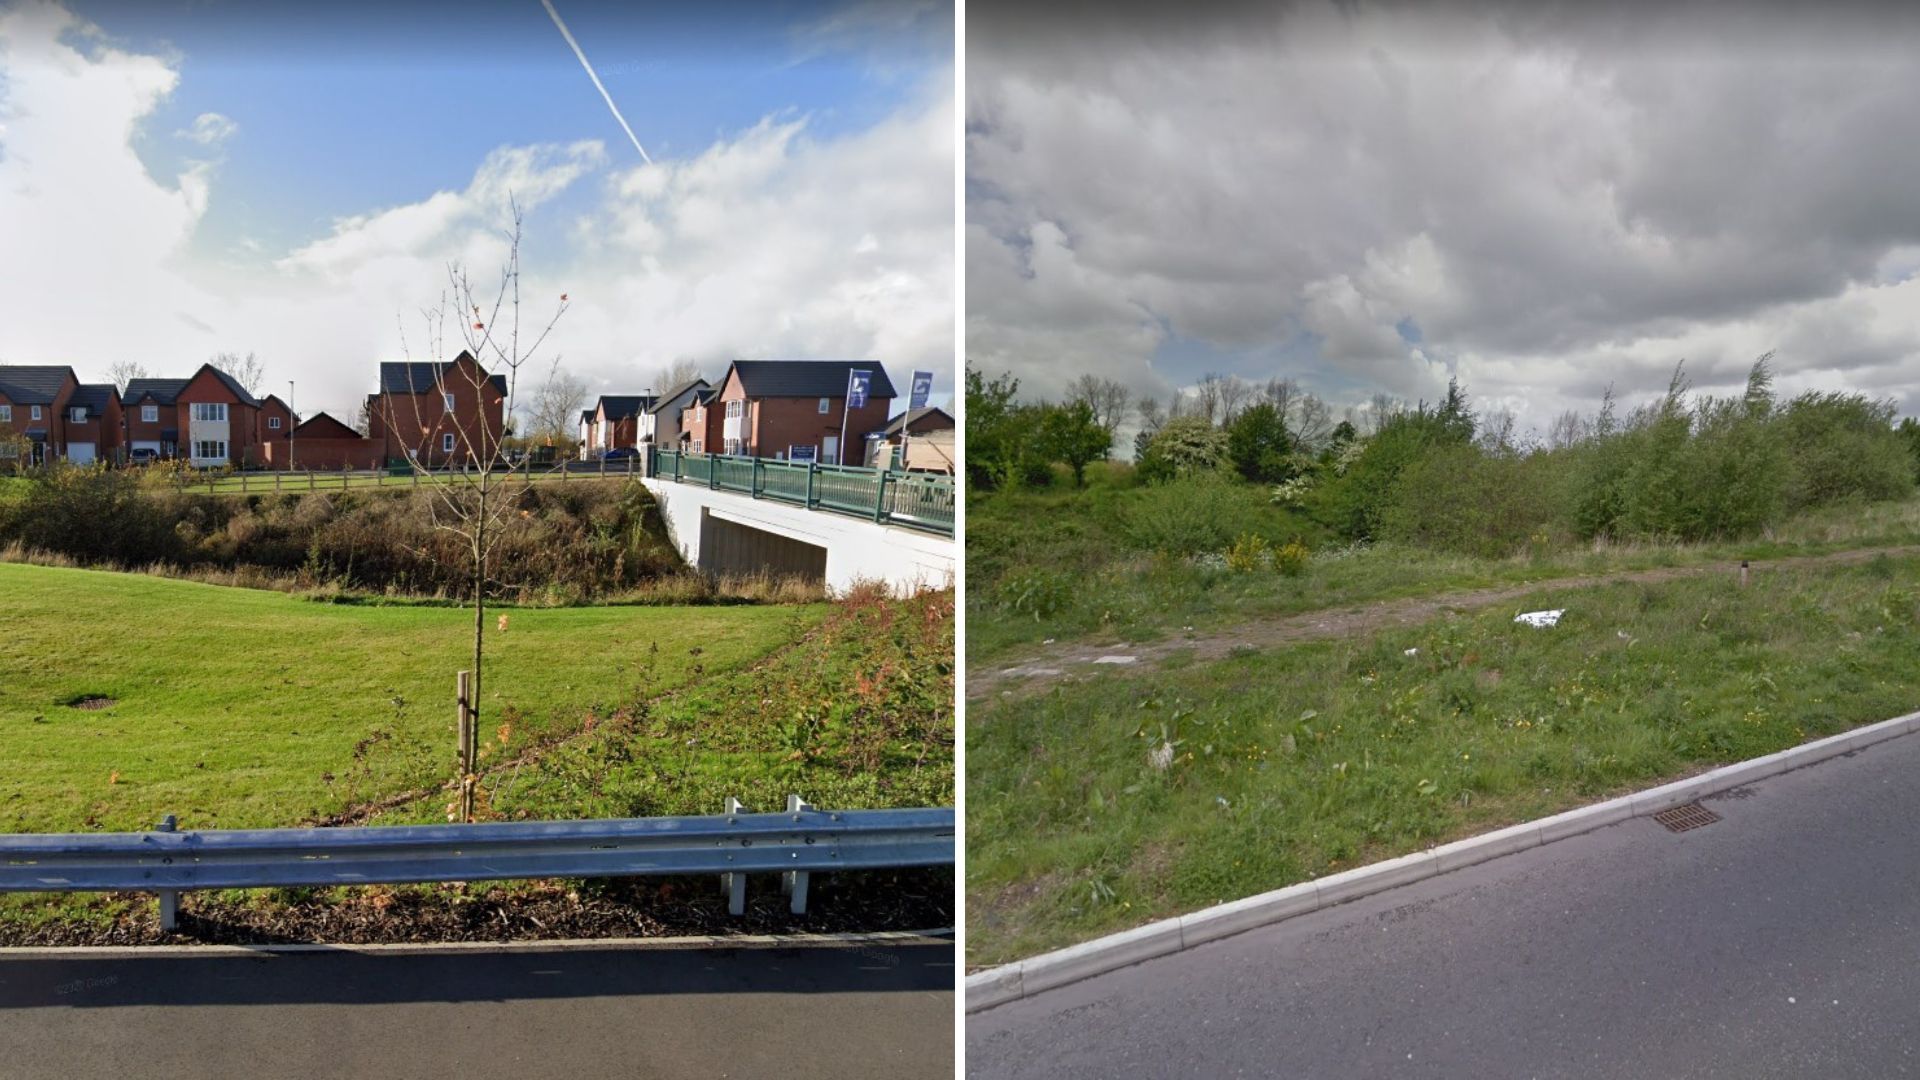 Parsonage Way development in Leigh in 2014 compared to 2020.